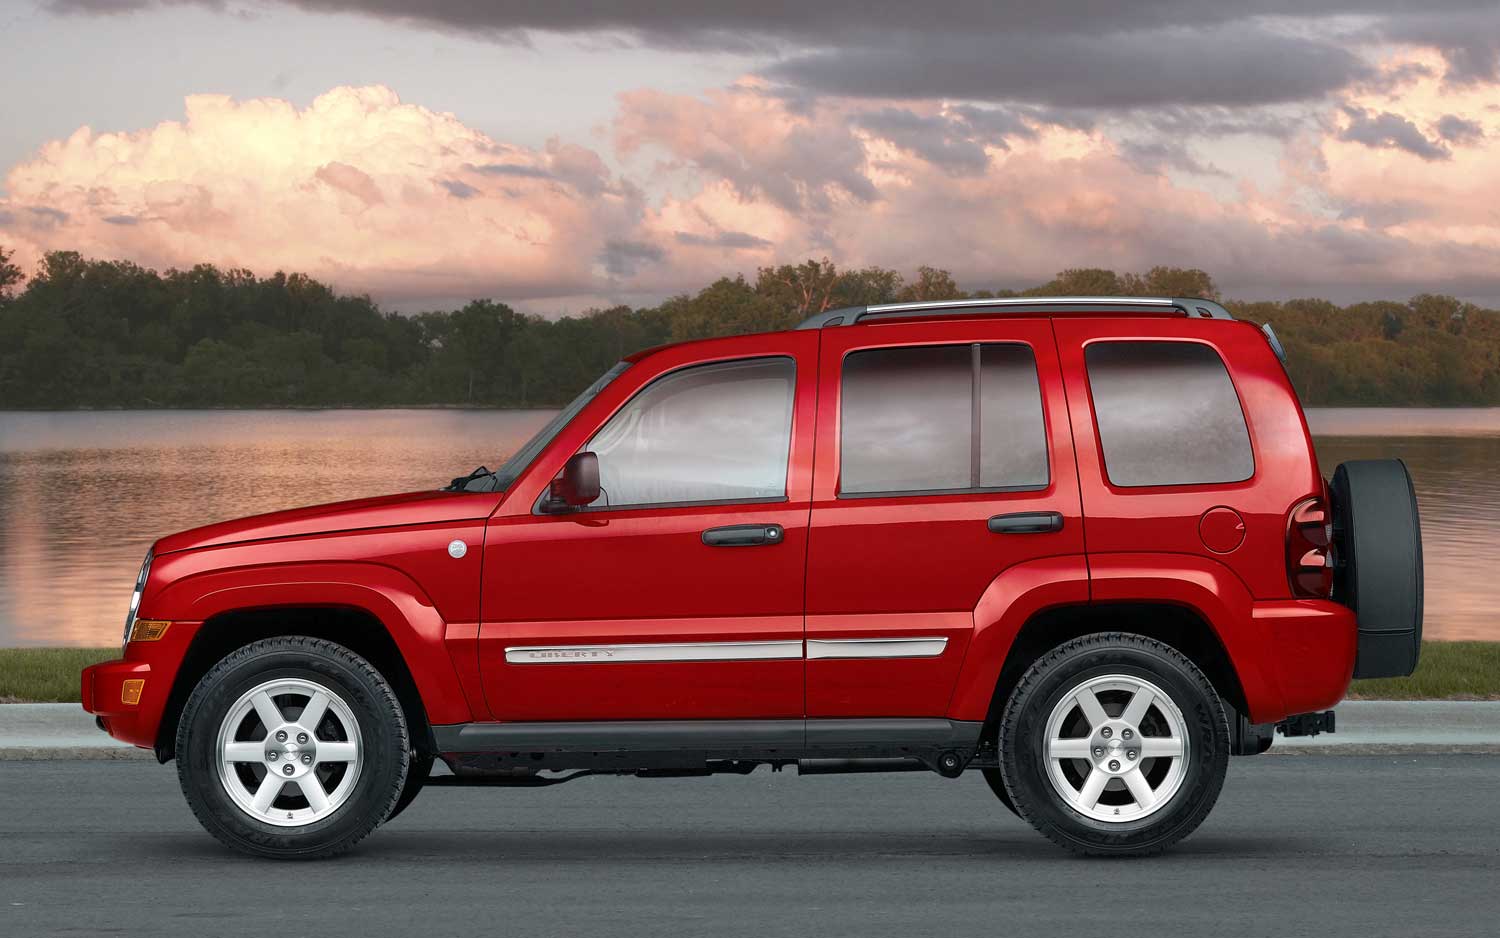 Jeep Liberty Suspension Recall Expanded to Include 137,176 2006-2007 Models